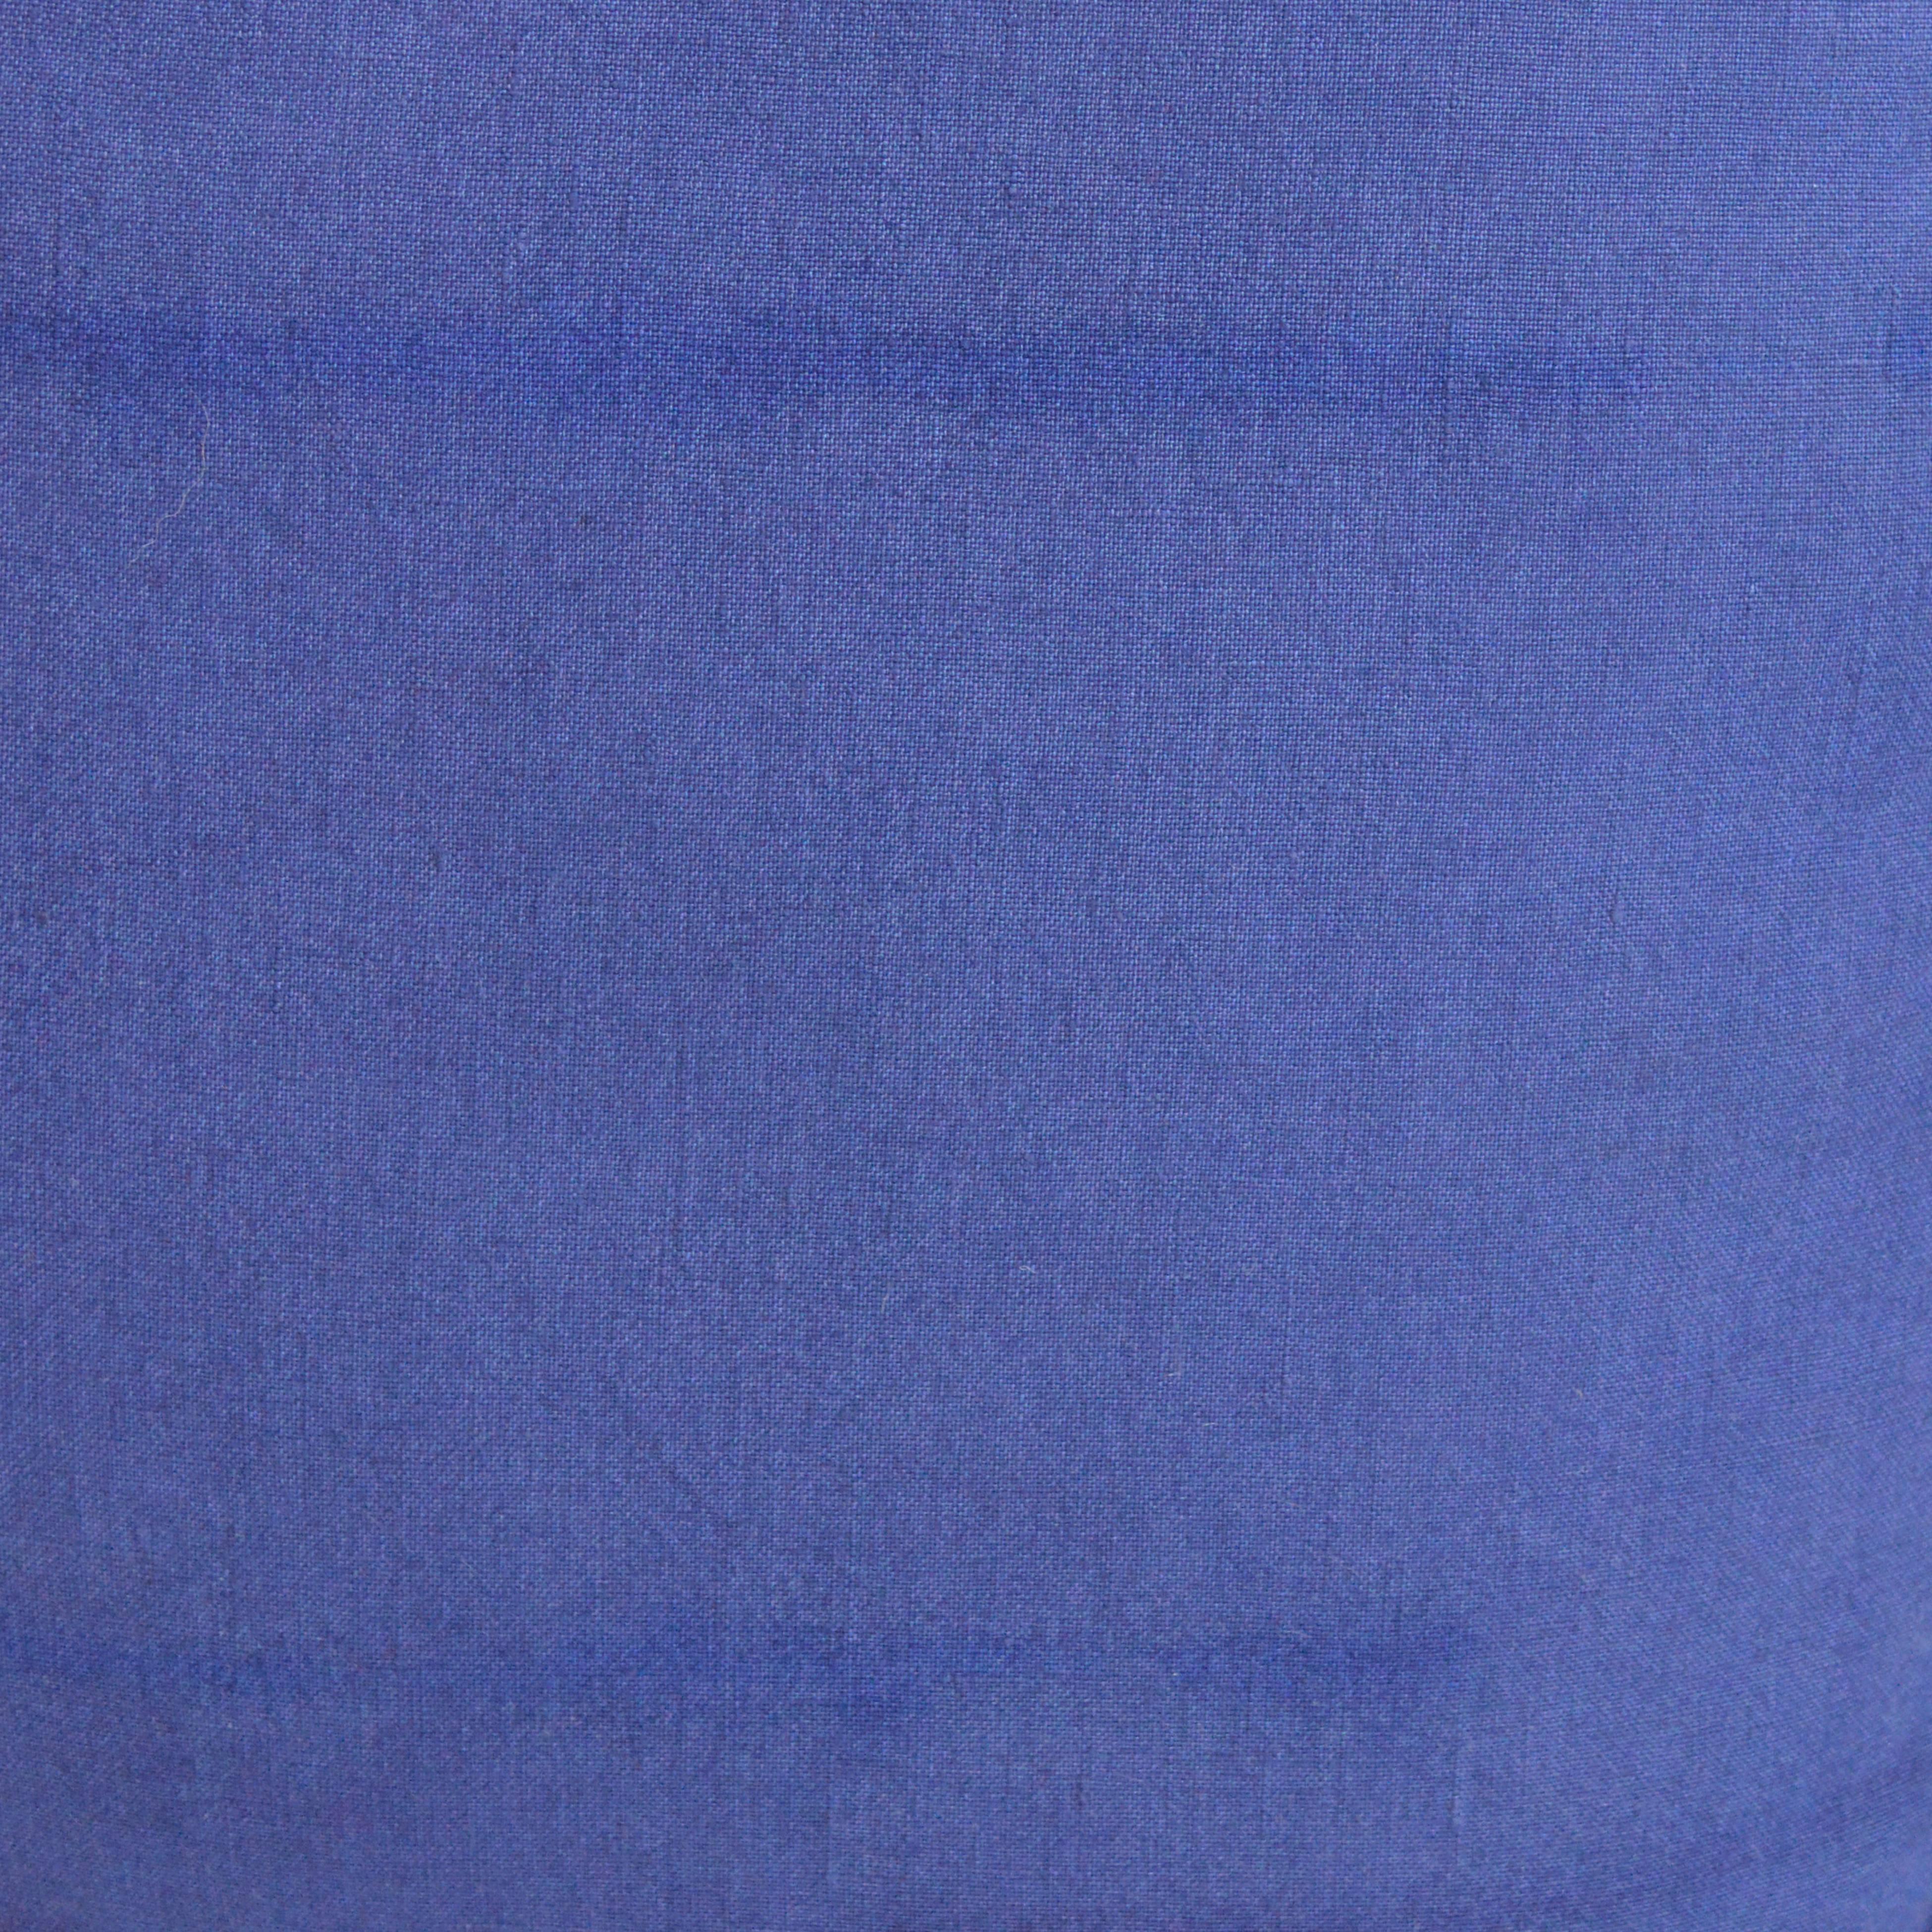 Bleu stitch is an contemporary blue on blue linen pillow, hand-painted by artists on both sides, making each pillow unique and truly one-of-a-kind. Sold individually, Stitch looks stunning as statement pieces, and look equally exquisite in a pair or